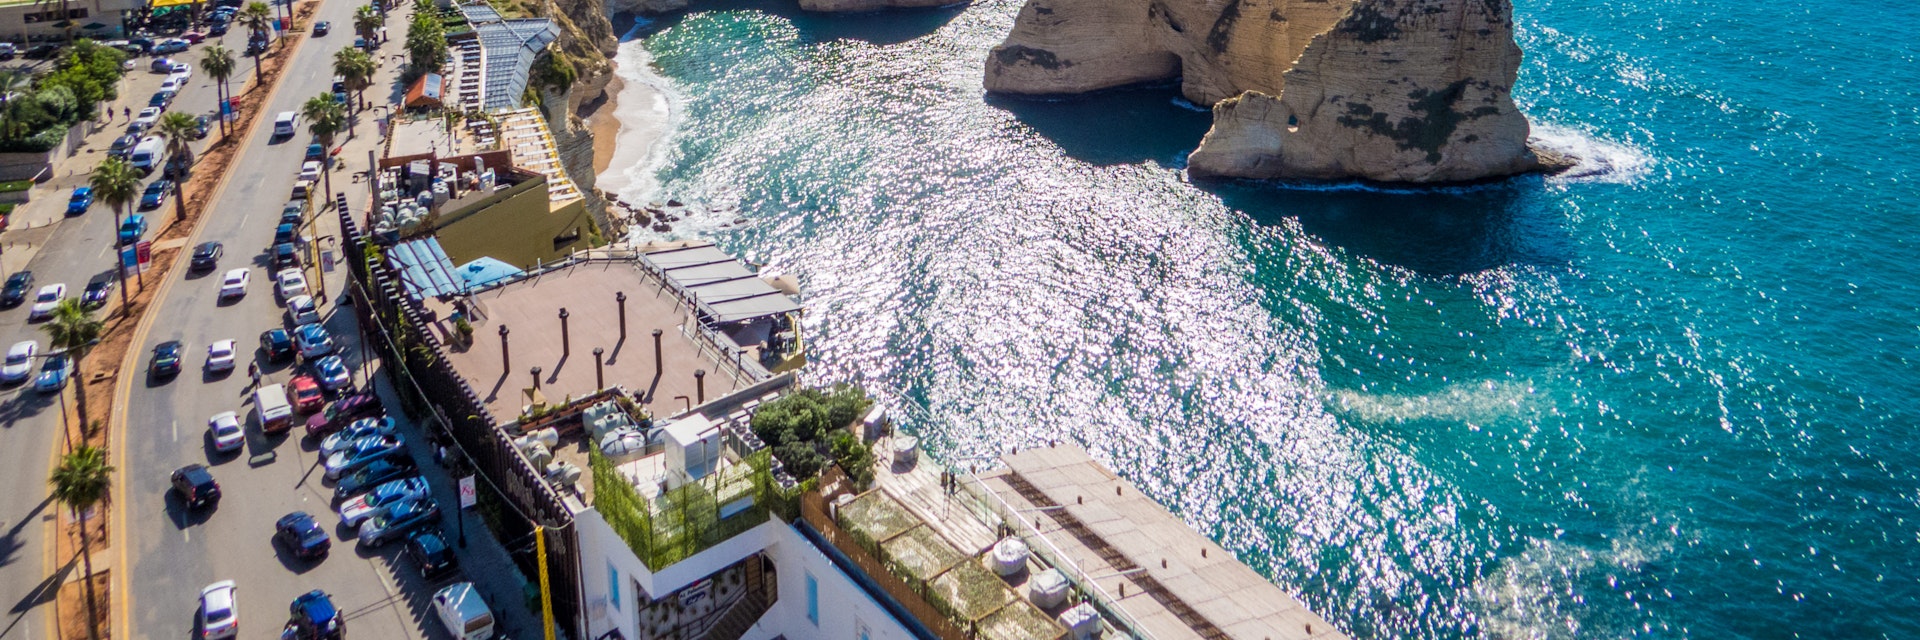 BEIRUT, LEBANON - NOVEMBER 2, 2017 - Aerial view of the Pigeons' Rocks on Raouche.
756972694
arab, traffic, road, cars, street, aerial view, corrosion, ancient, old, geology, lebanon, beirut, pigeon, sea, rocks, rock, middle, east, mediterranean, coast, travel, tourism, ocean, tourist, island, cliff, white, landscape, outdoor, wave, stone, sunny, destination, shore, journey, trip, relax, blue